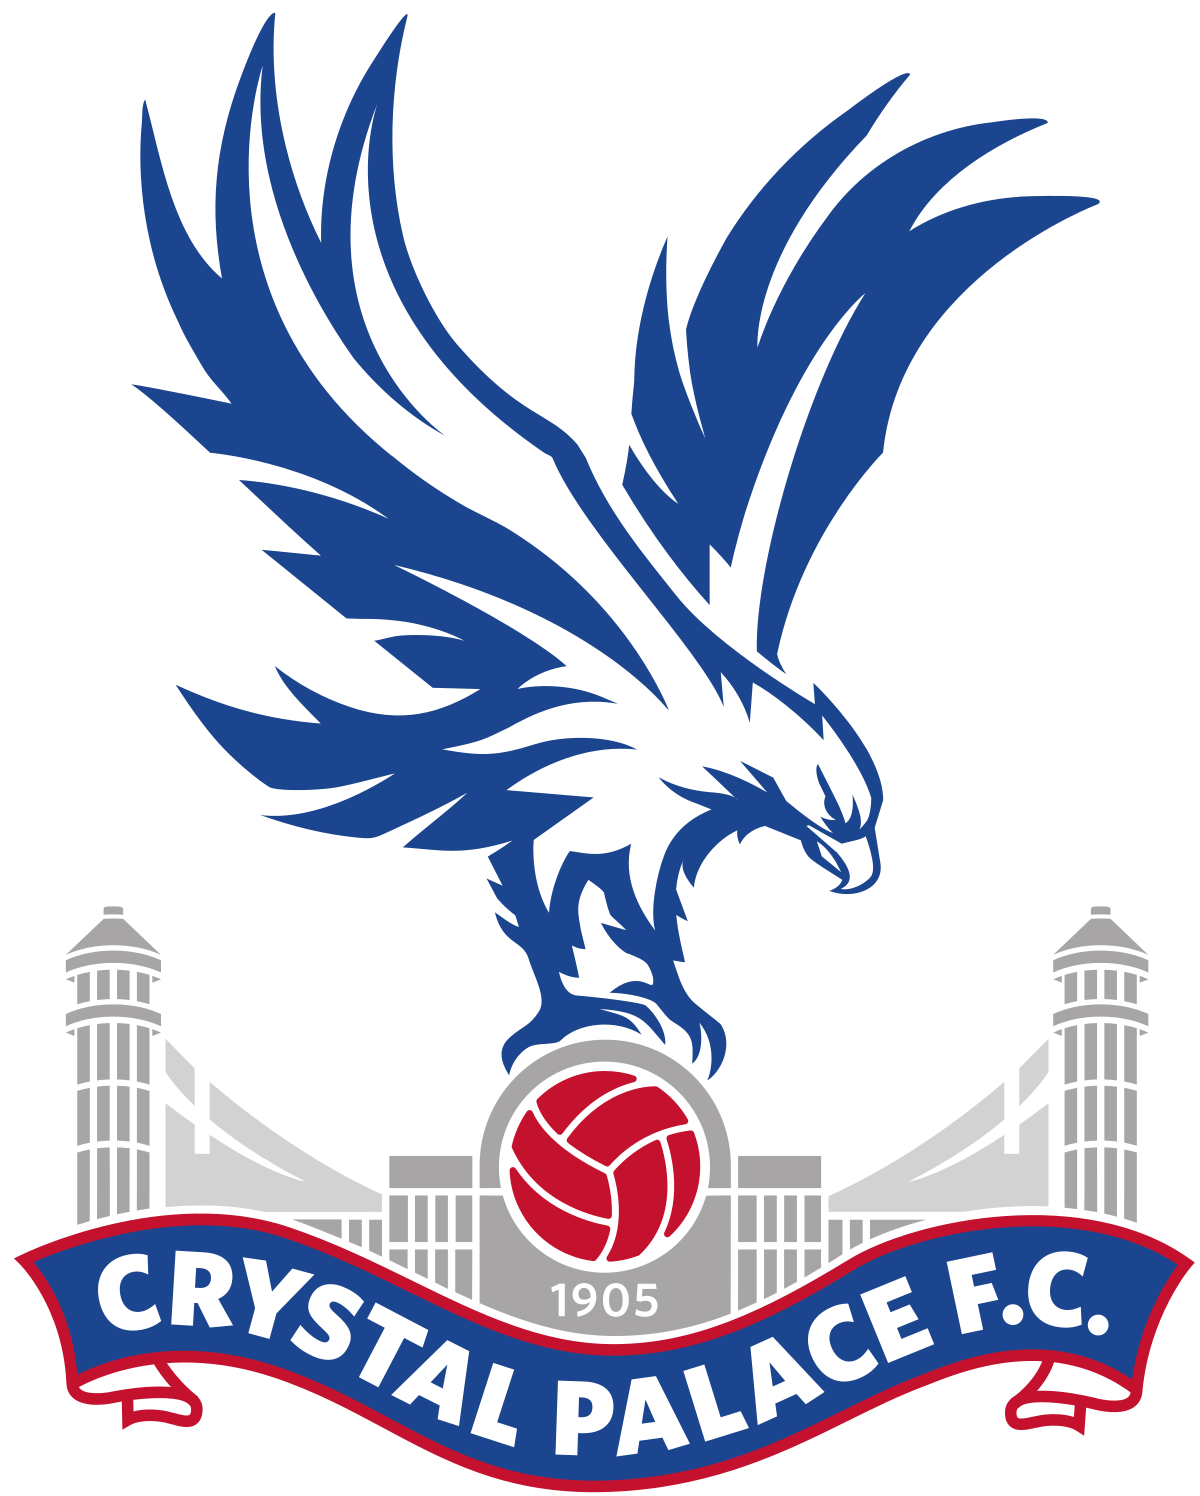 First Team Performance Analyst - Crystal Palace